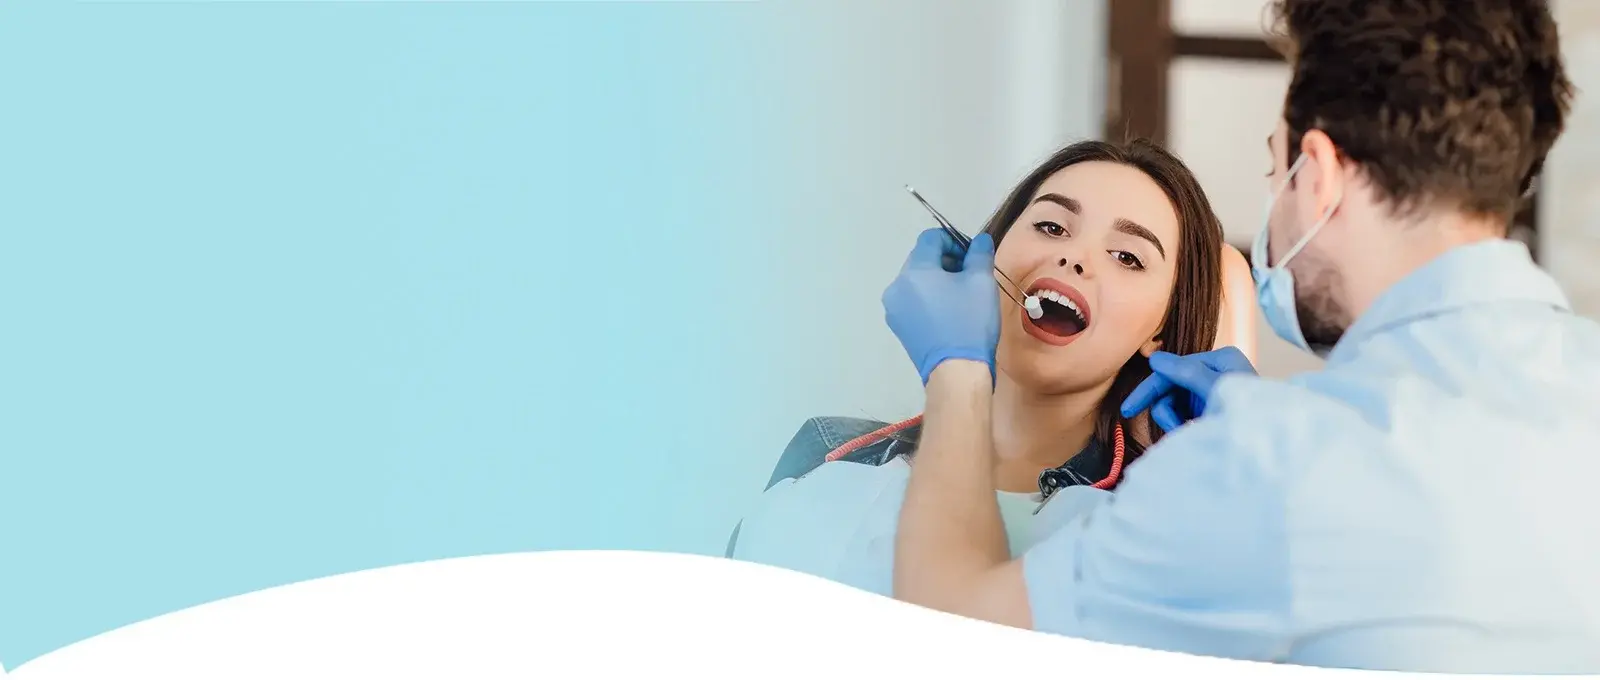 Transform your smile with Dental Bonding at West Lynde Dental in Whitby, achieving natural beauty